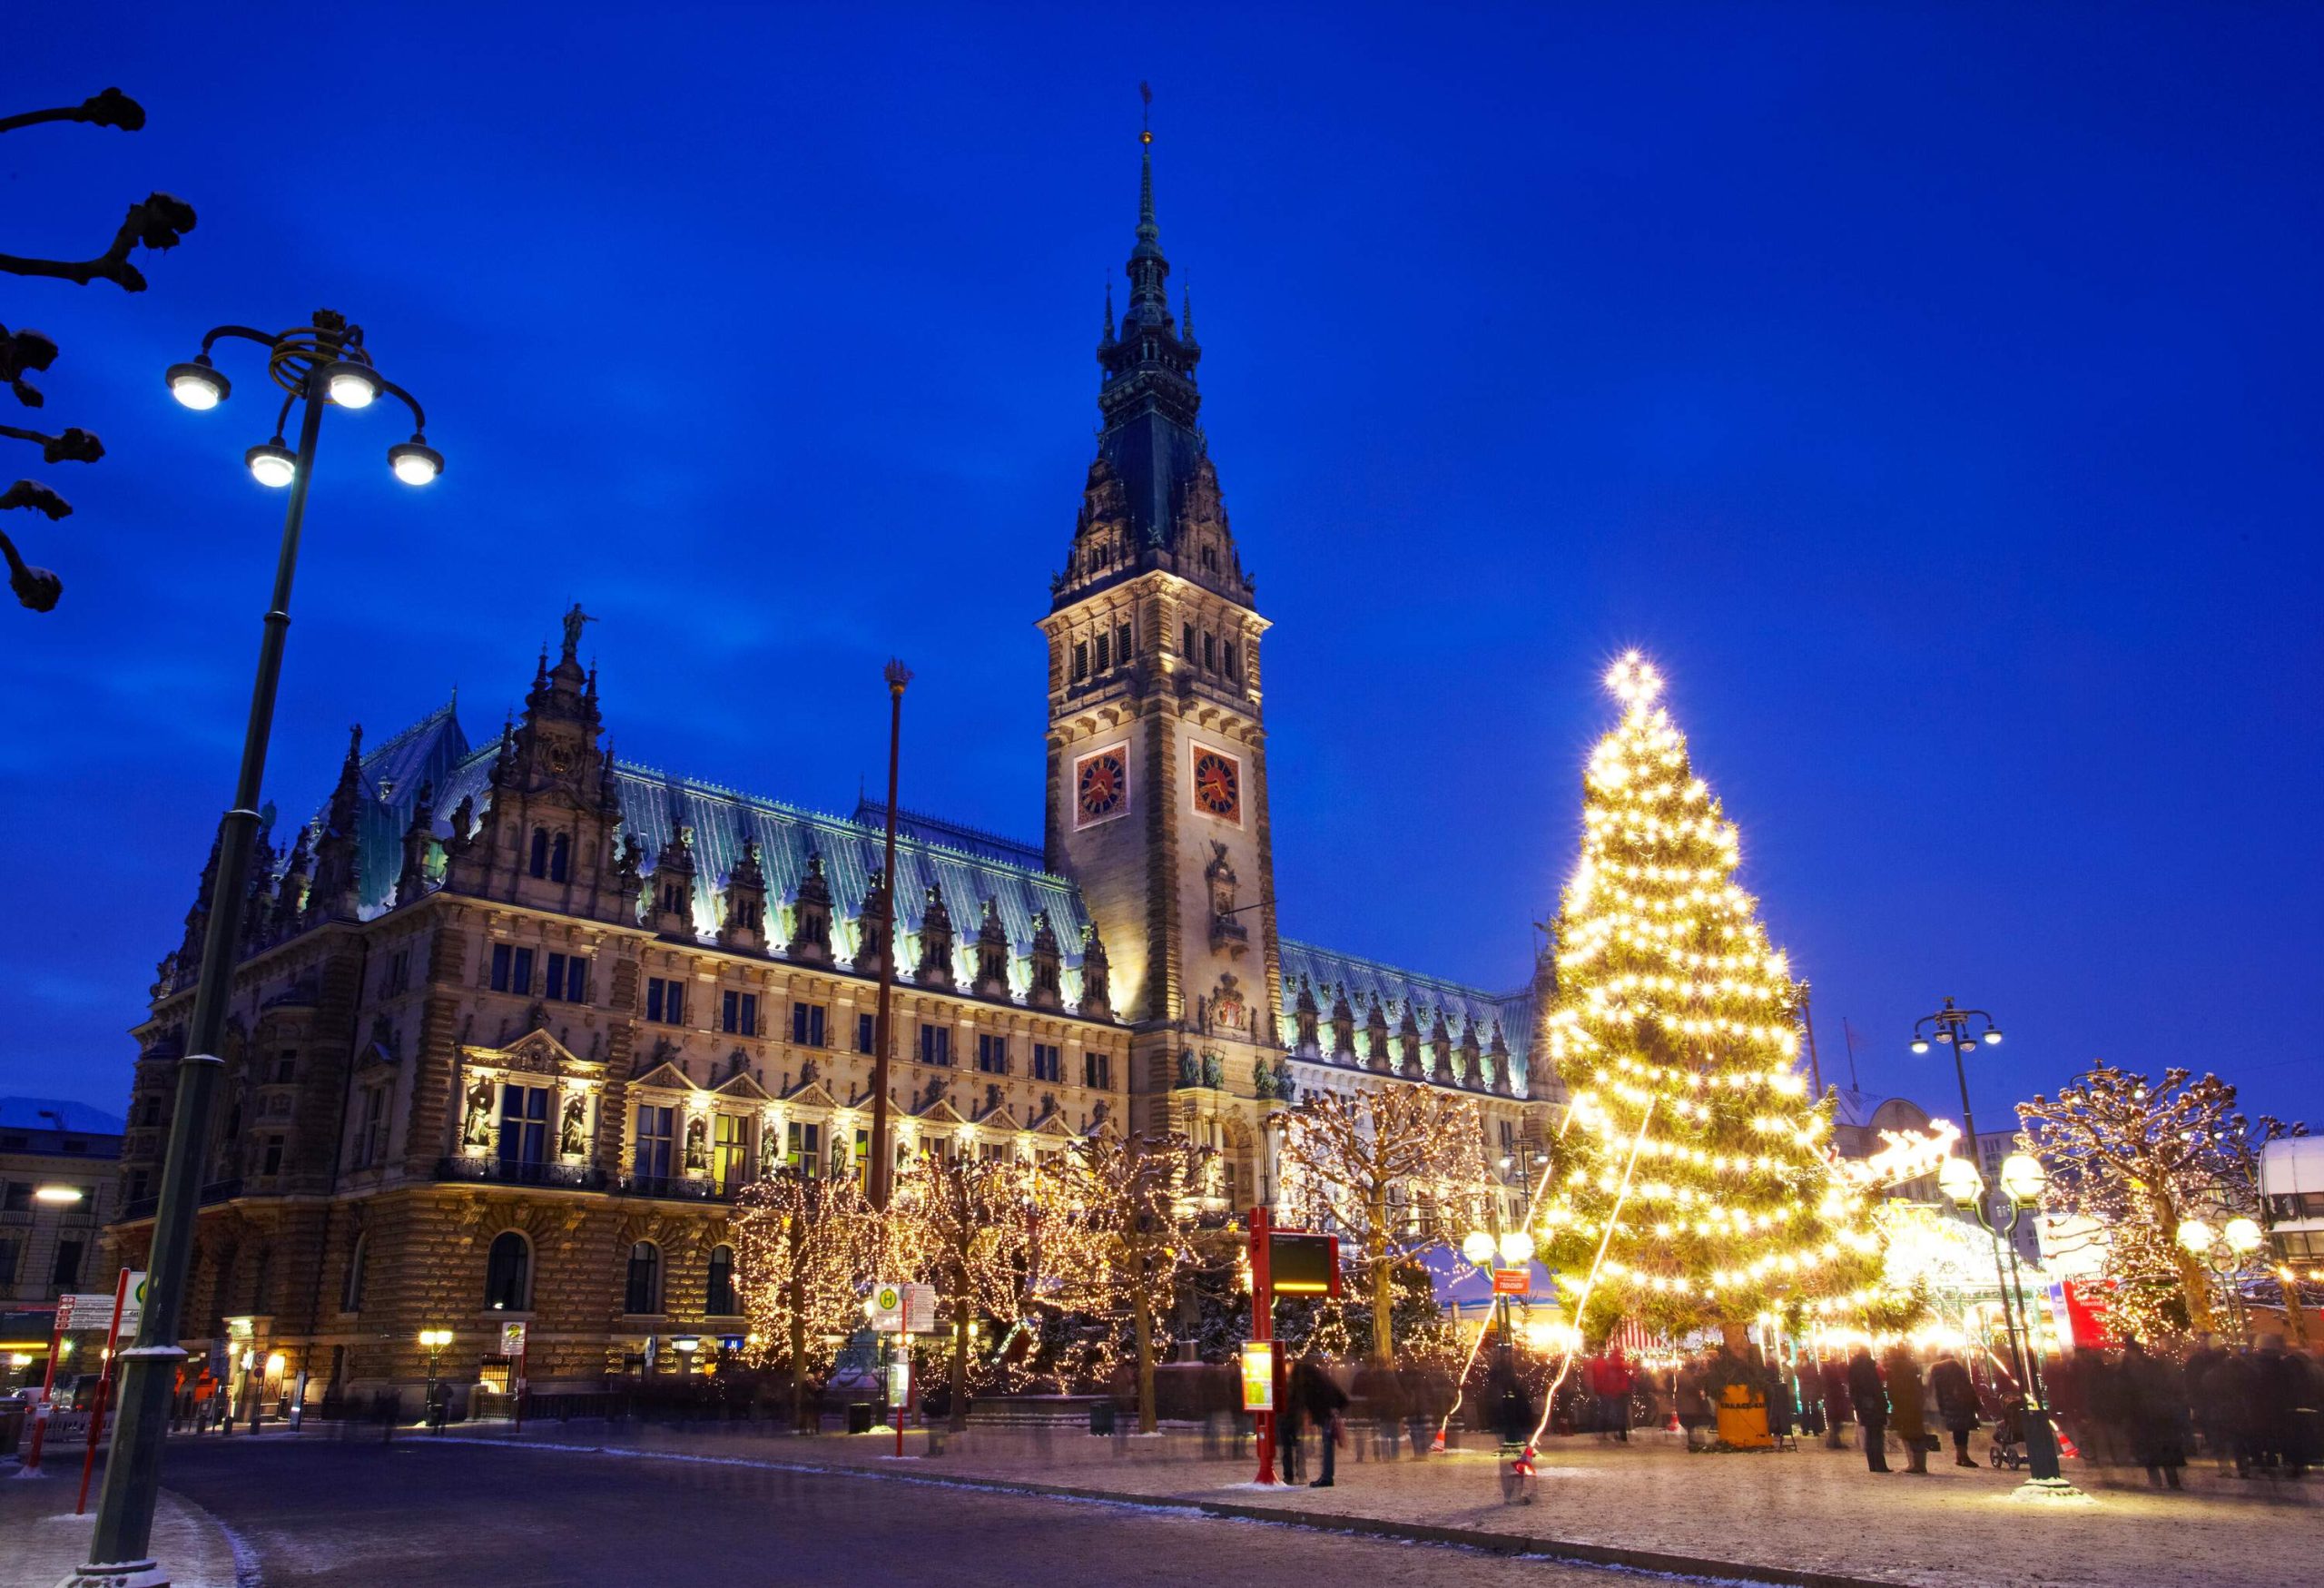 The neo-Gothic New Town Hall building in Munich, Germany and a gigantic lit Christmas tree in front.